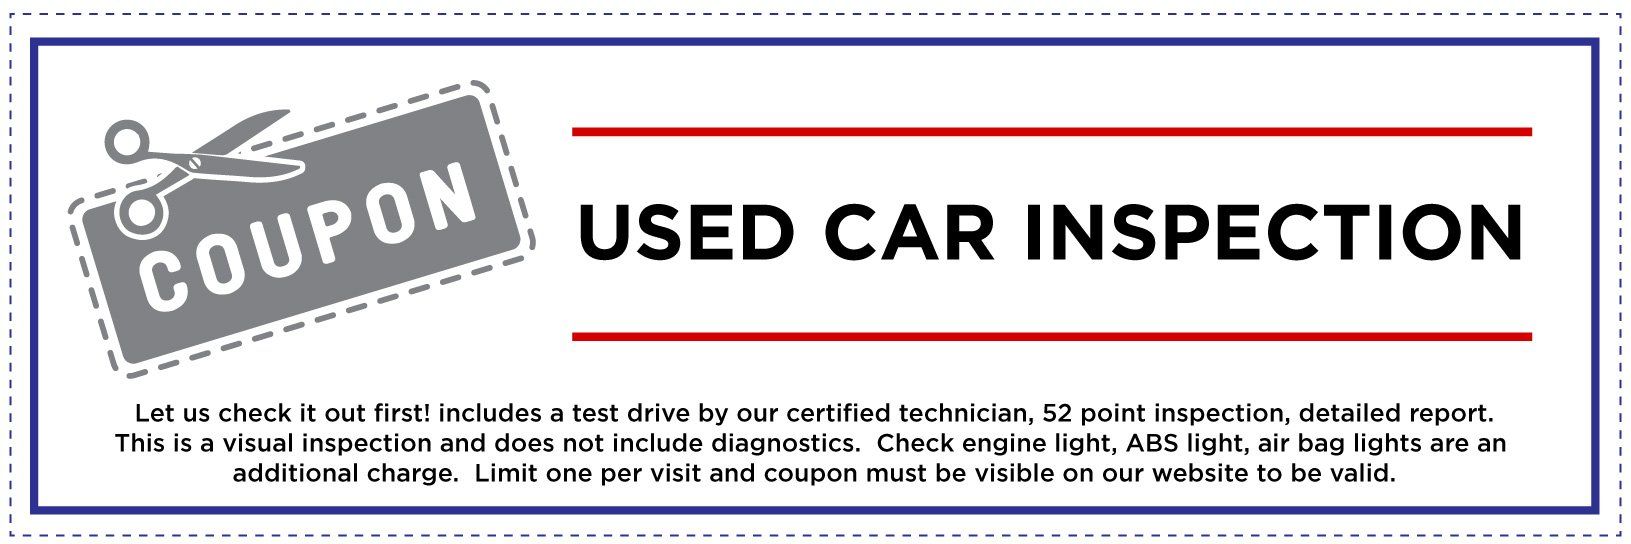 USED CAR INSPECTION $49.99